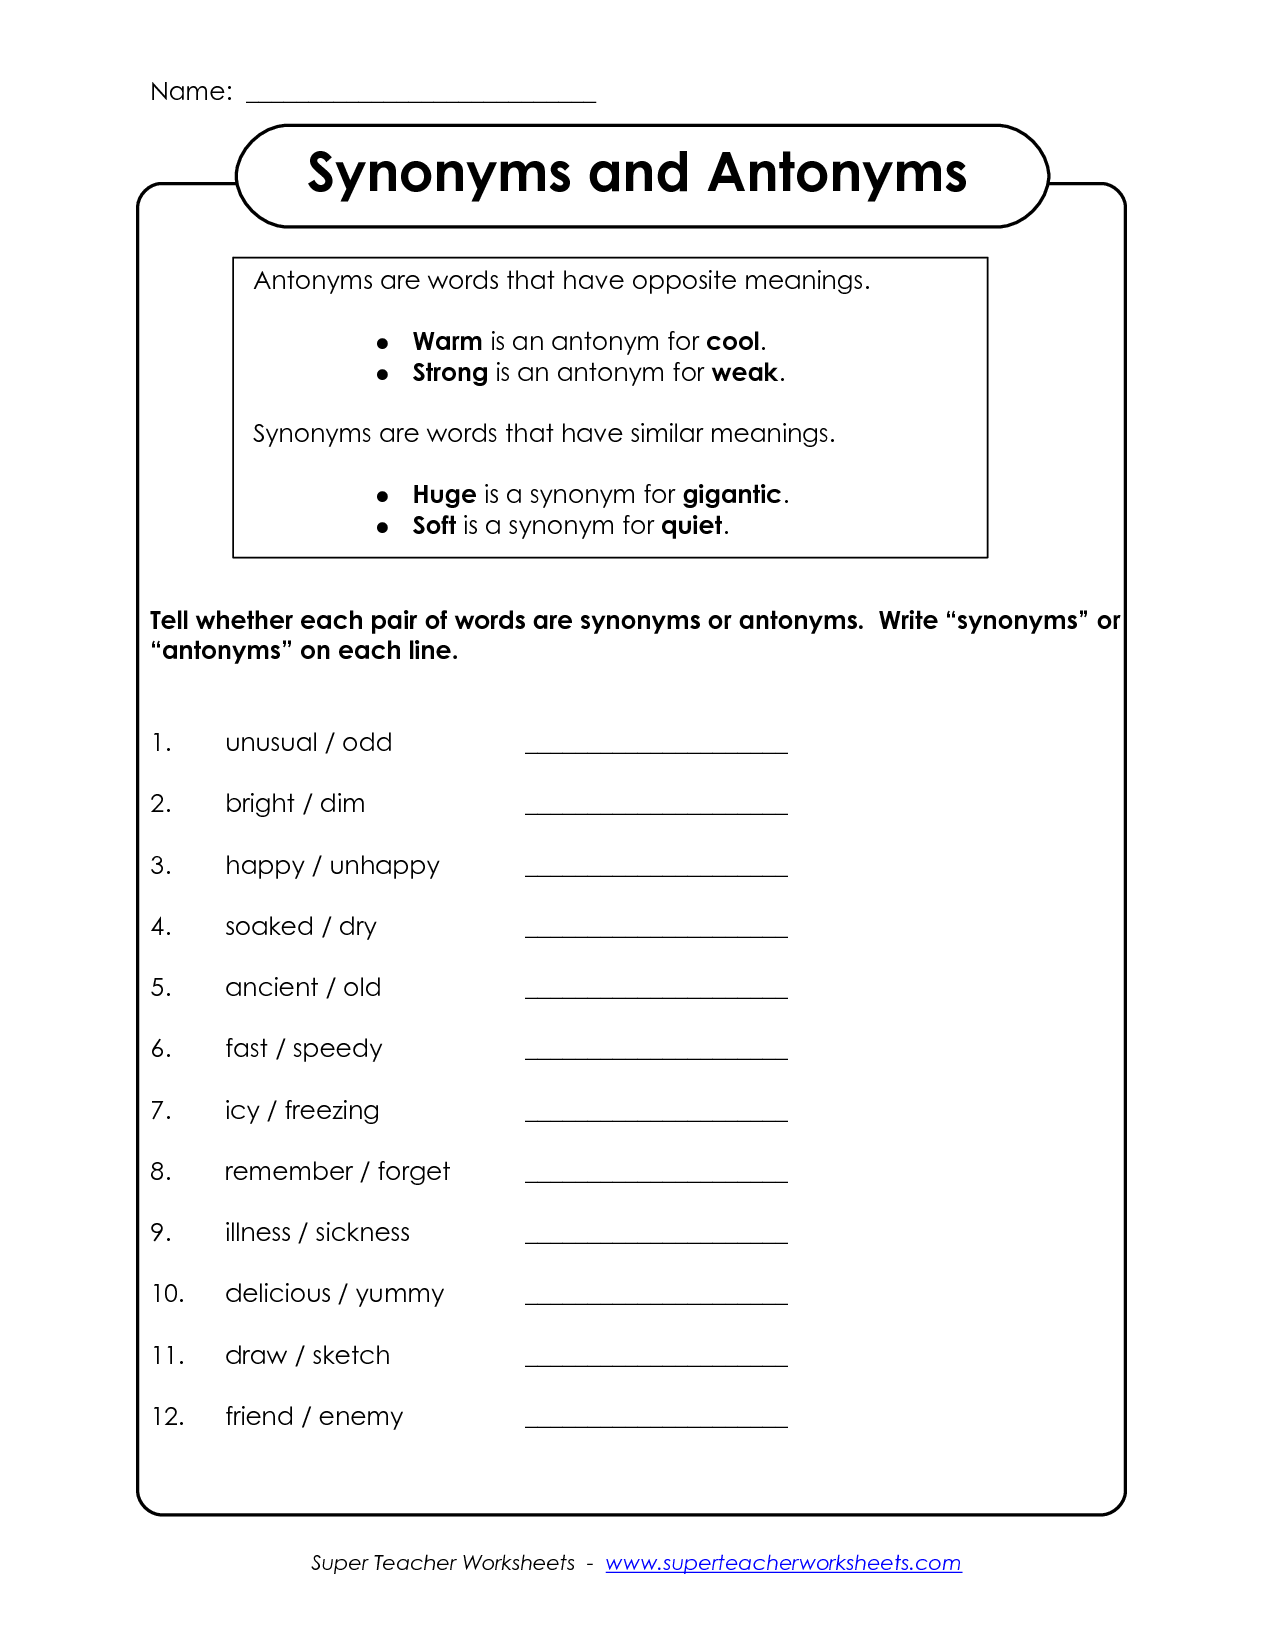 14-best-images-of-printable-synonyms-worksheets-grade-3-synonyms-and